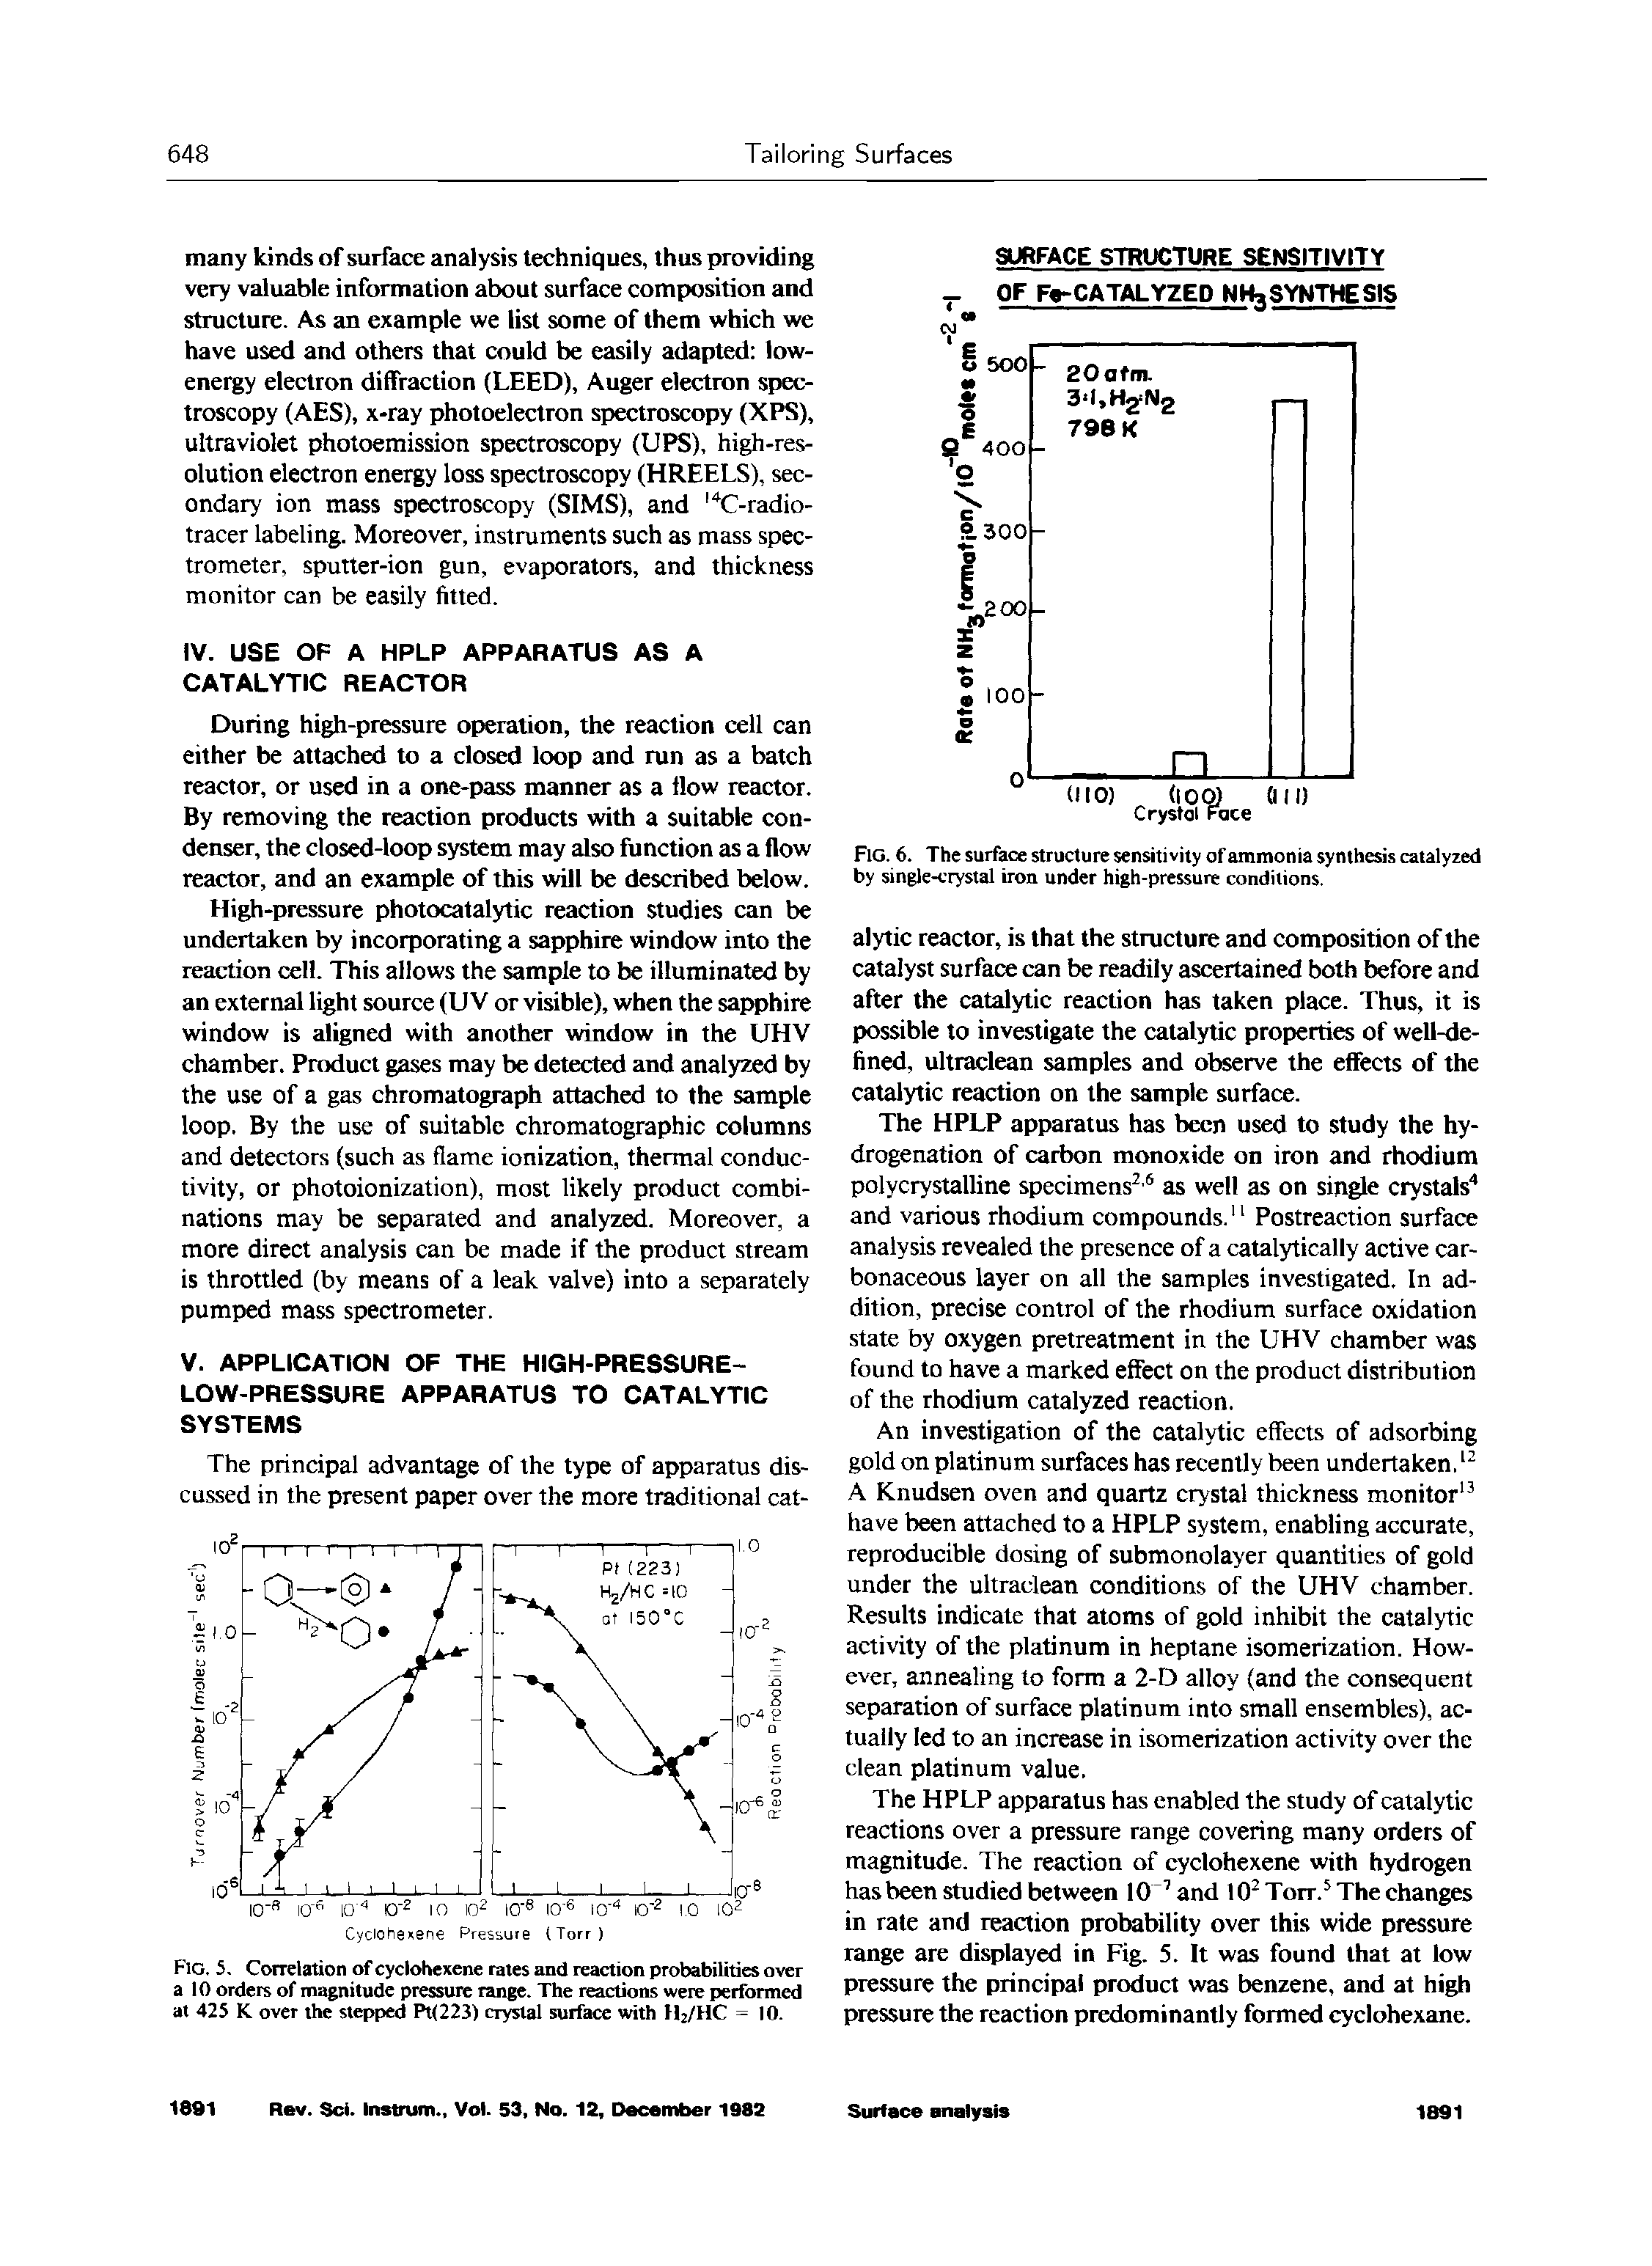 Fig. 6. The surface structure sensitivity of ammonia synthesis catalyzed by single-crystal iron under high-pressure conditions.